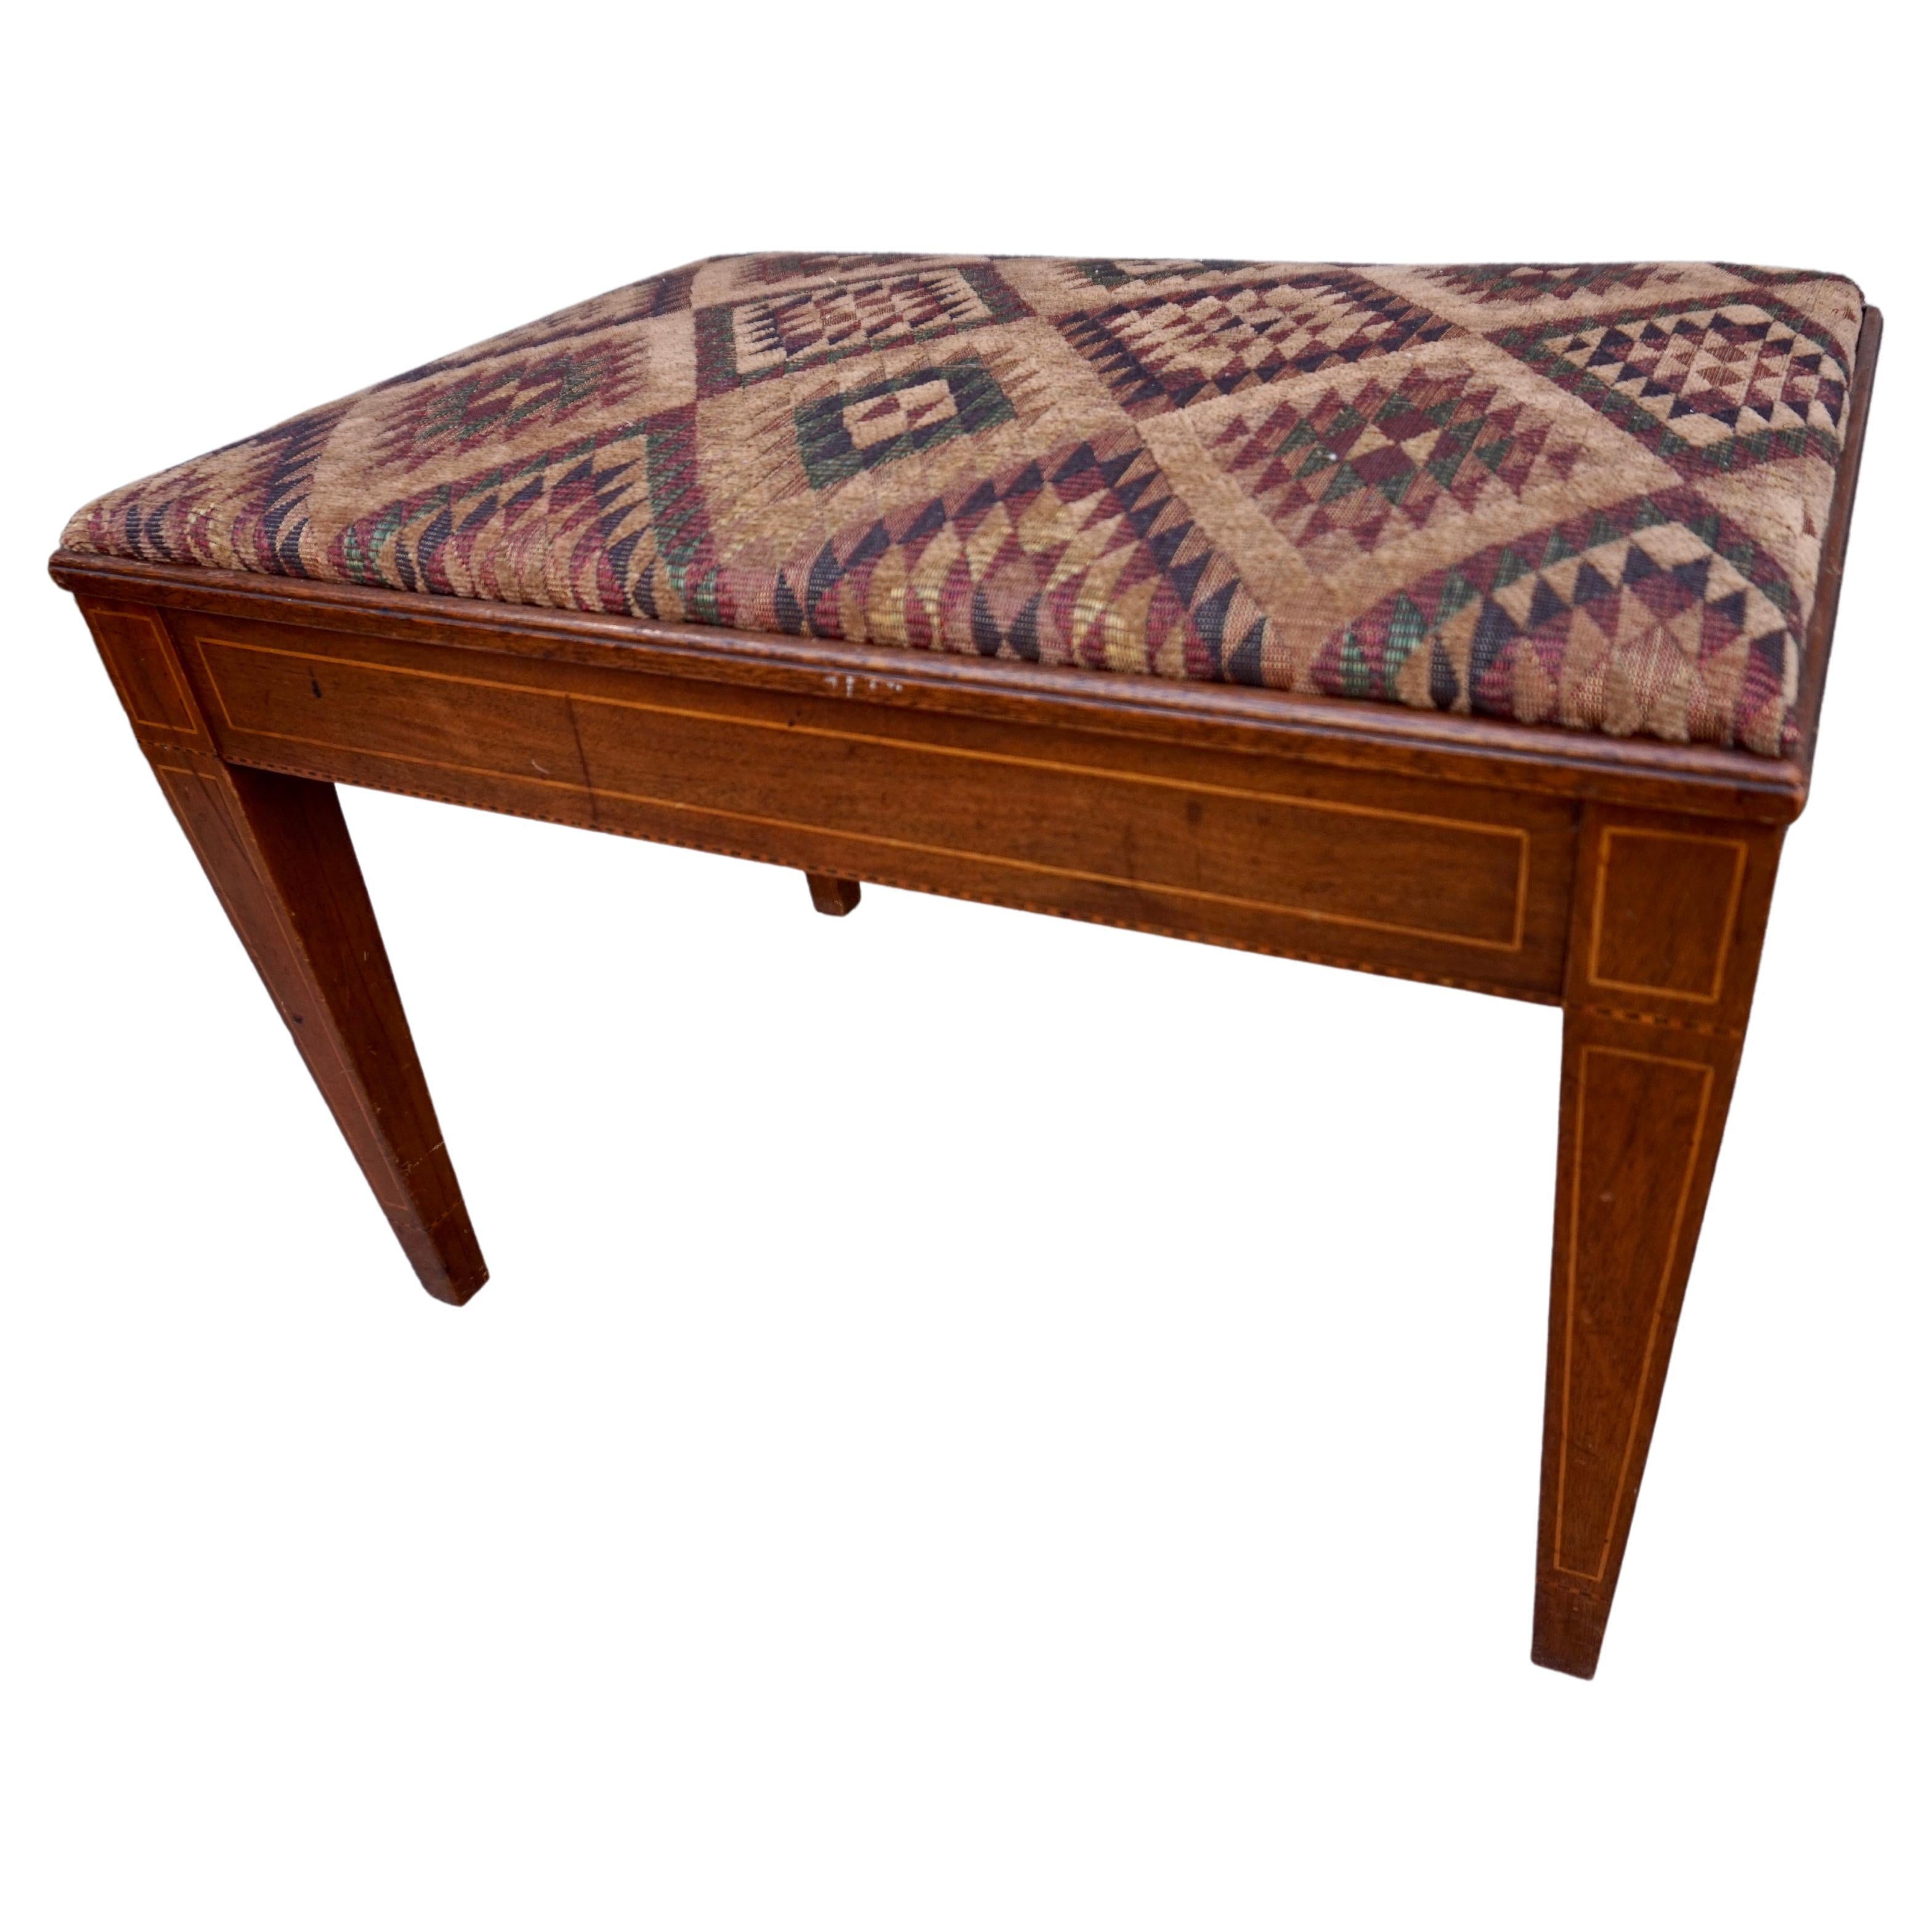 Edwardian Solid Small Foyer Bench With Satinwood Inlay & Chenille Fabric Seat For Sale